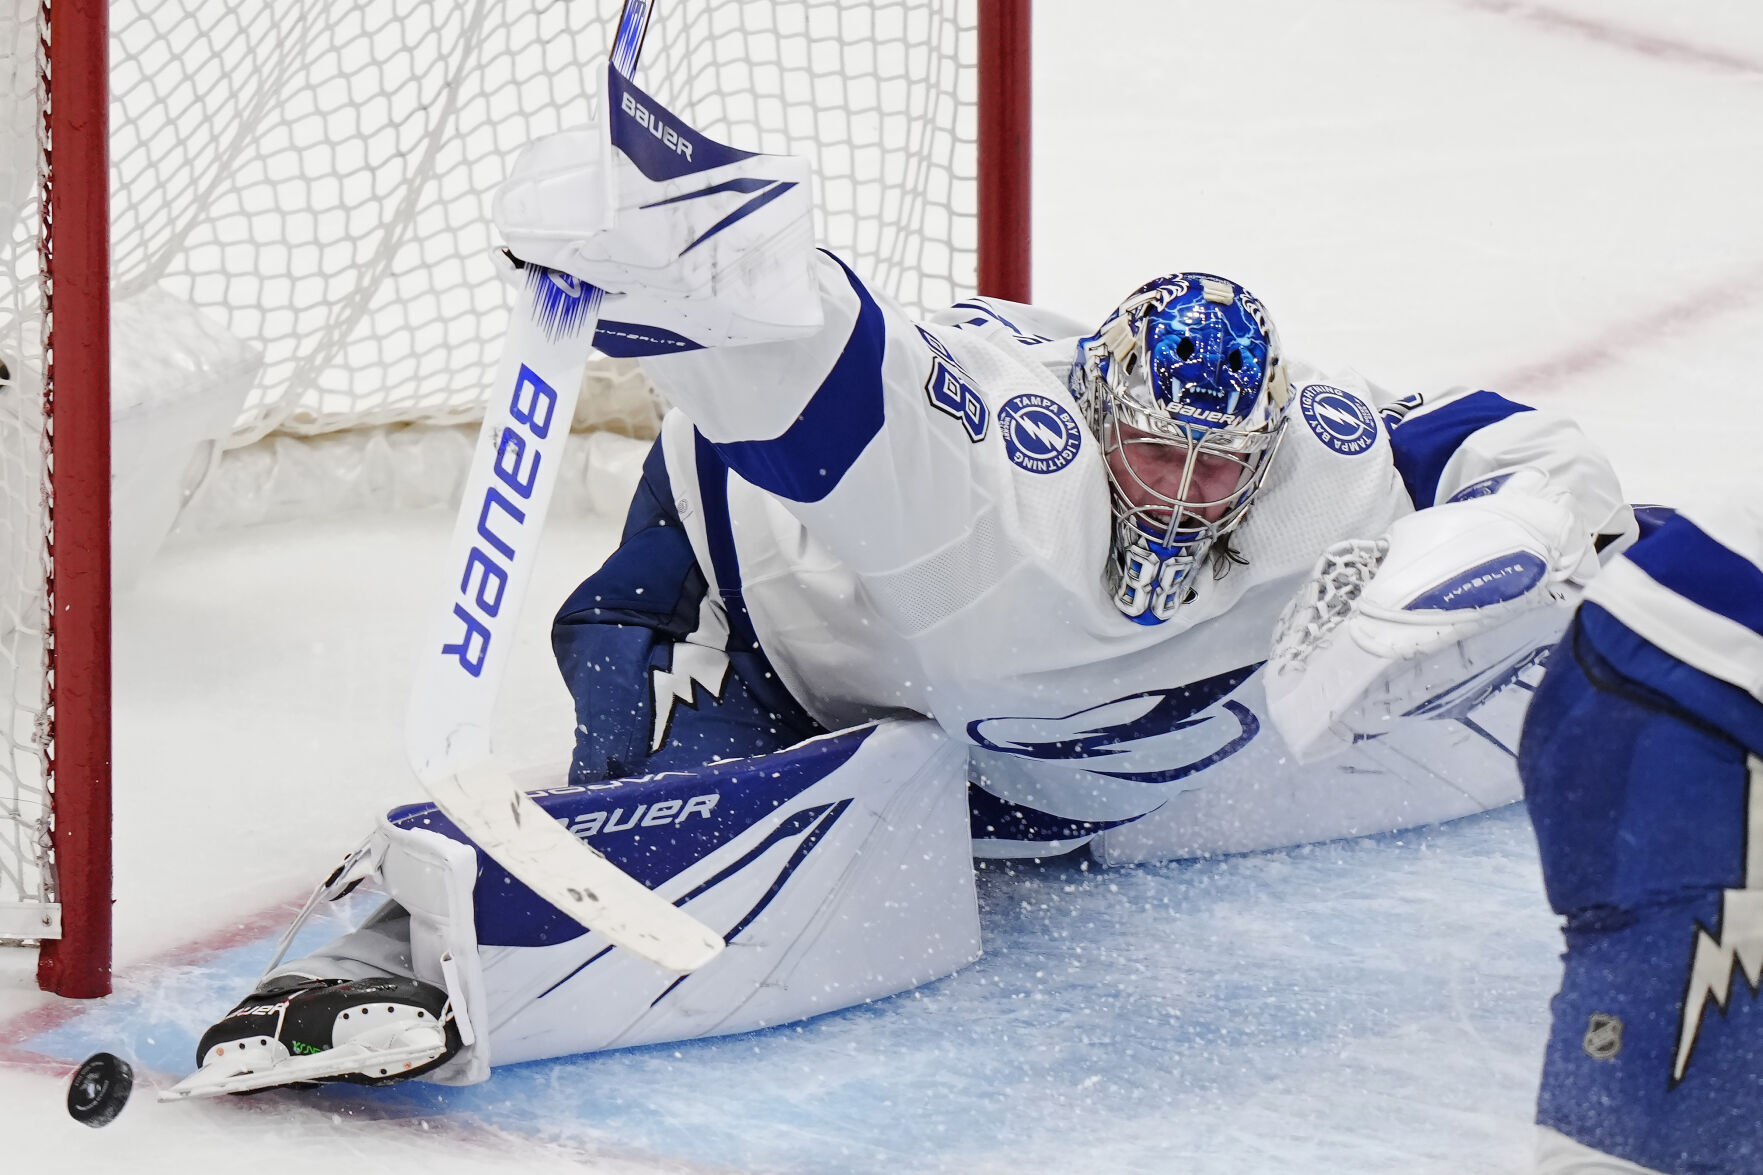 Vasilevskiy remains the choice among NHL skaters for the title of best goalie in the world